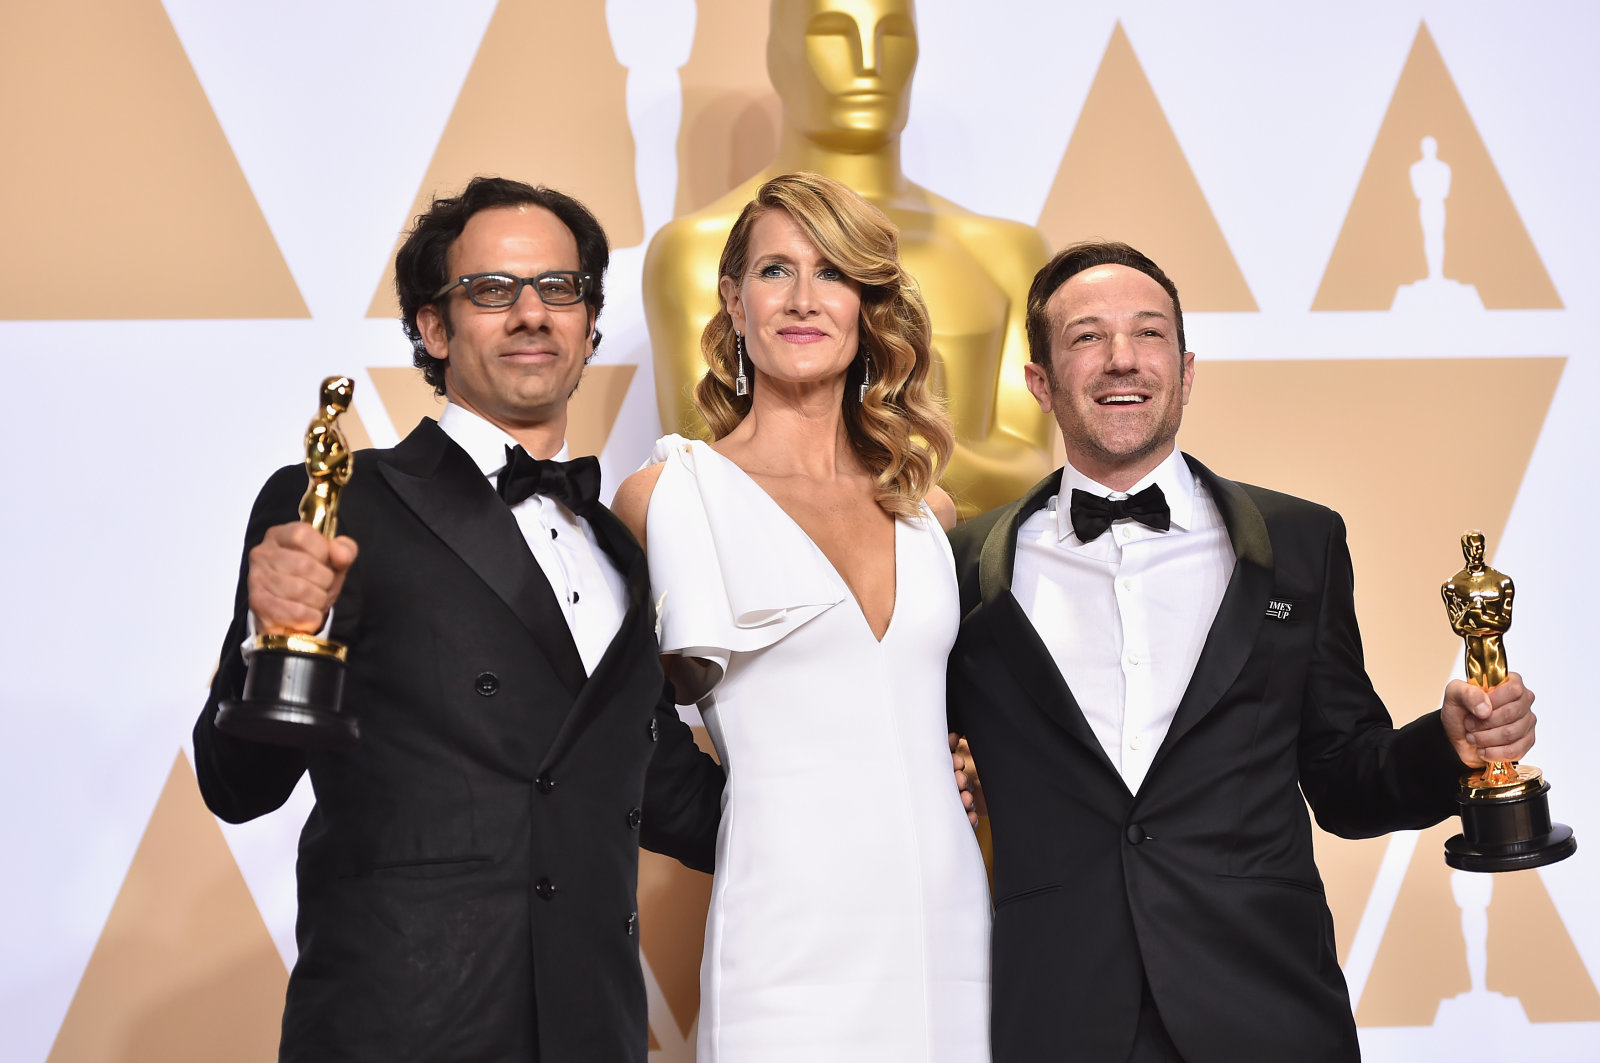 HOLLYWOOD, CA - MARCH 04: Actor Laura Dern (C) with producer Dan Cogan (L) and director Bryan Fogel, winners of the Best Documentary Feature for Icarus  pose in the press room during the 90th Annual Academy Awards at Hollywood & Highland Center on March 4, 2018 in Hollywood, California.  (Photo by Alberto E. Rodriguez/Getty Images)